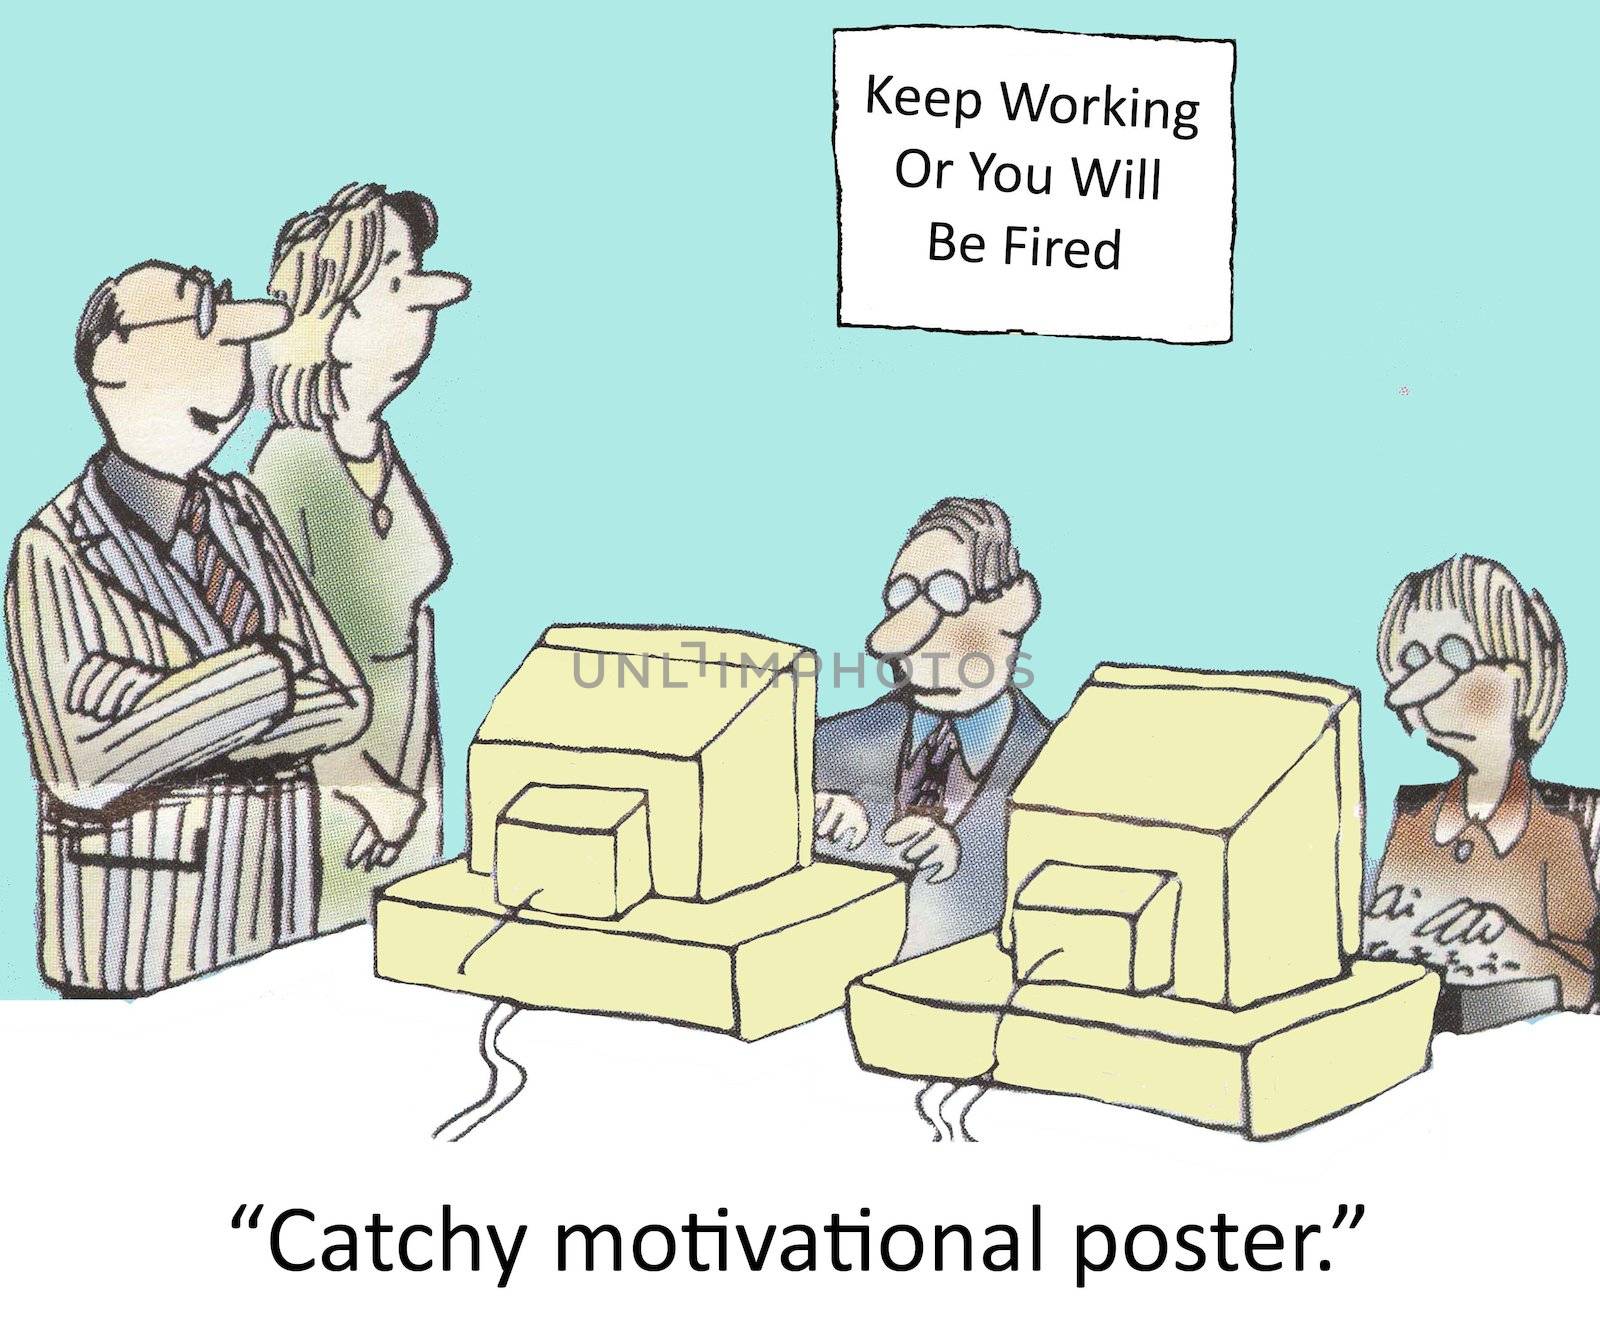 (Keep Working or You Will Be Fired)  "Catchy motivational poster."